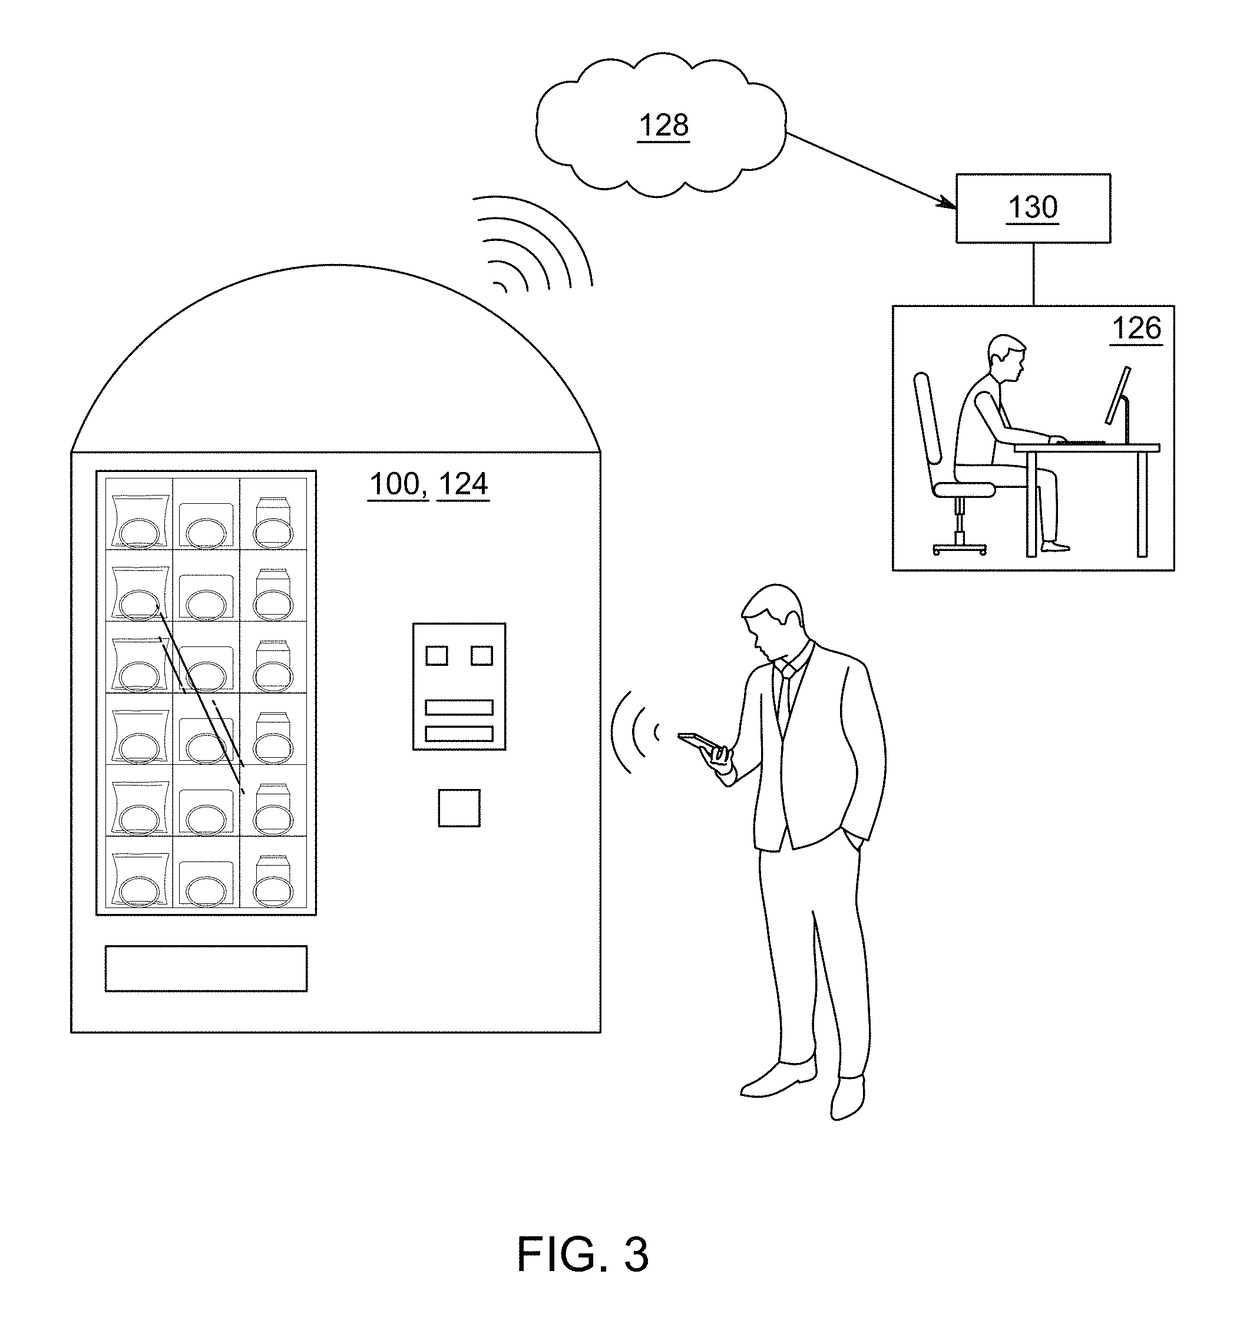 Adapter device for obtaining payments and monitoring inventory levels of a vending machine